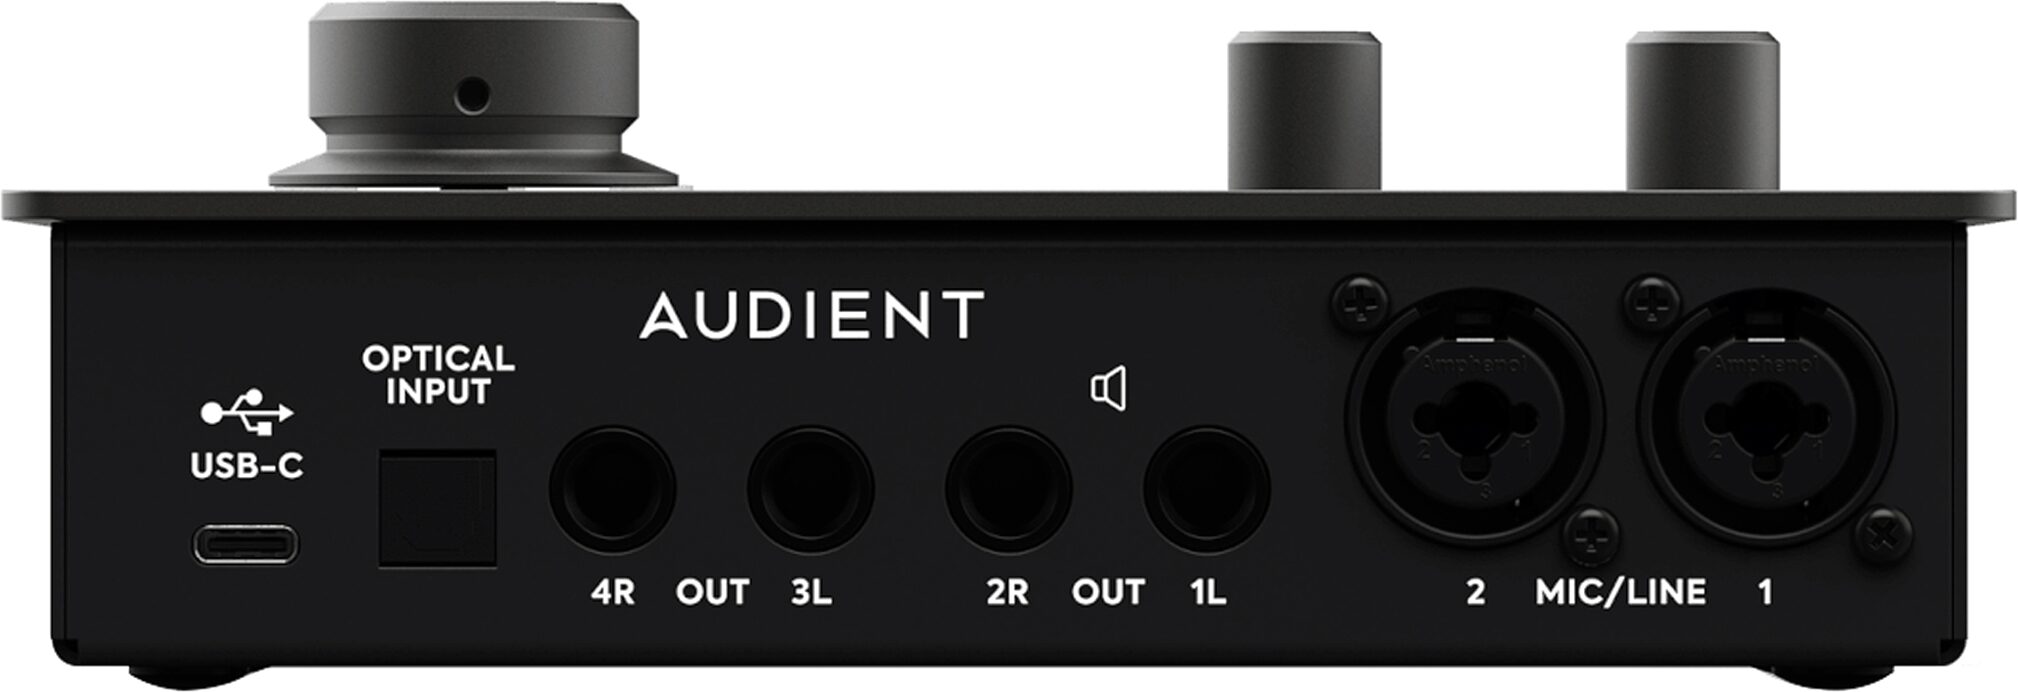 Audient iD14 MK2 USB Audio Interface | zZounds